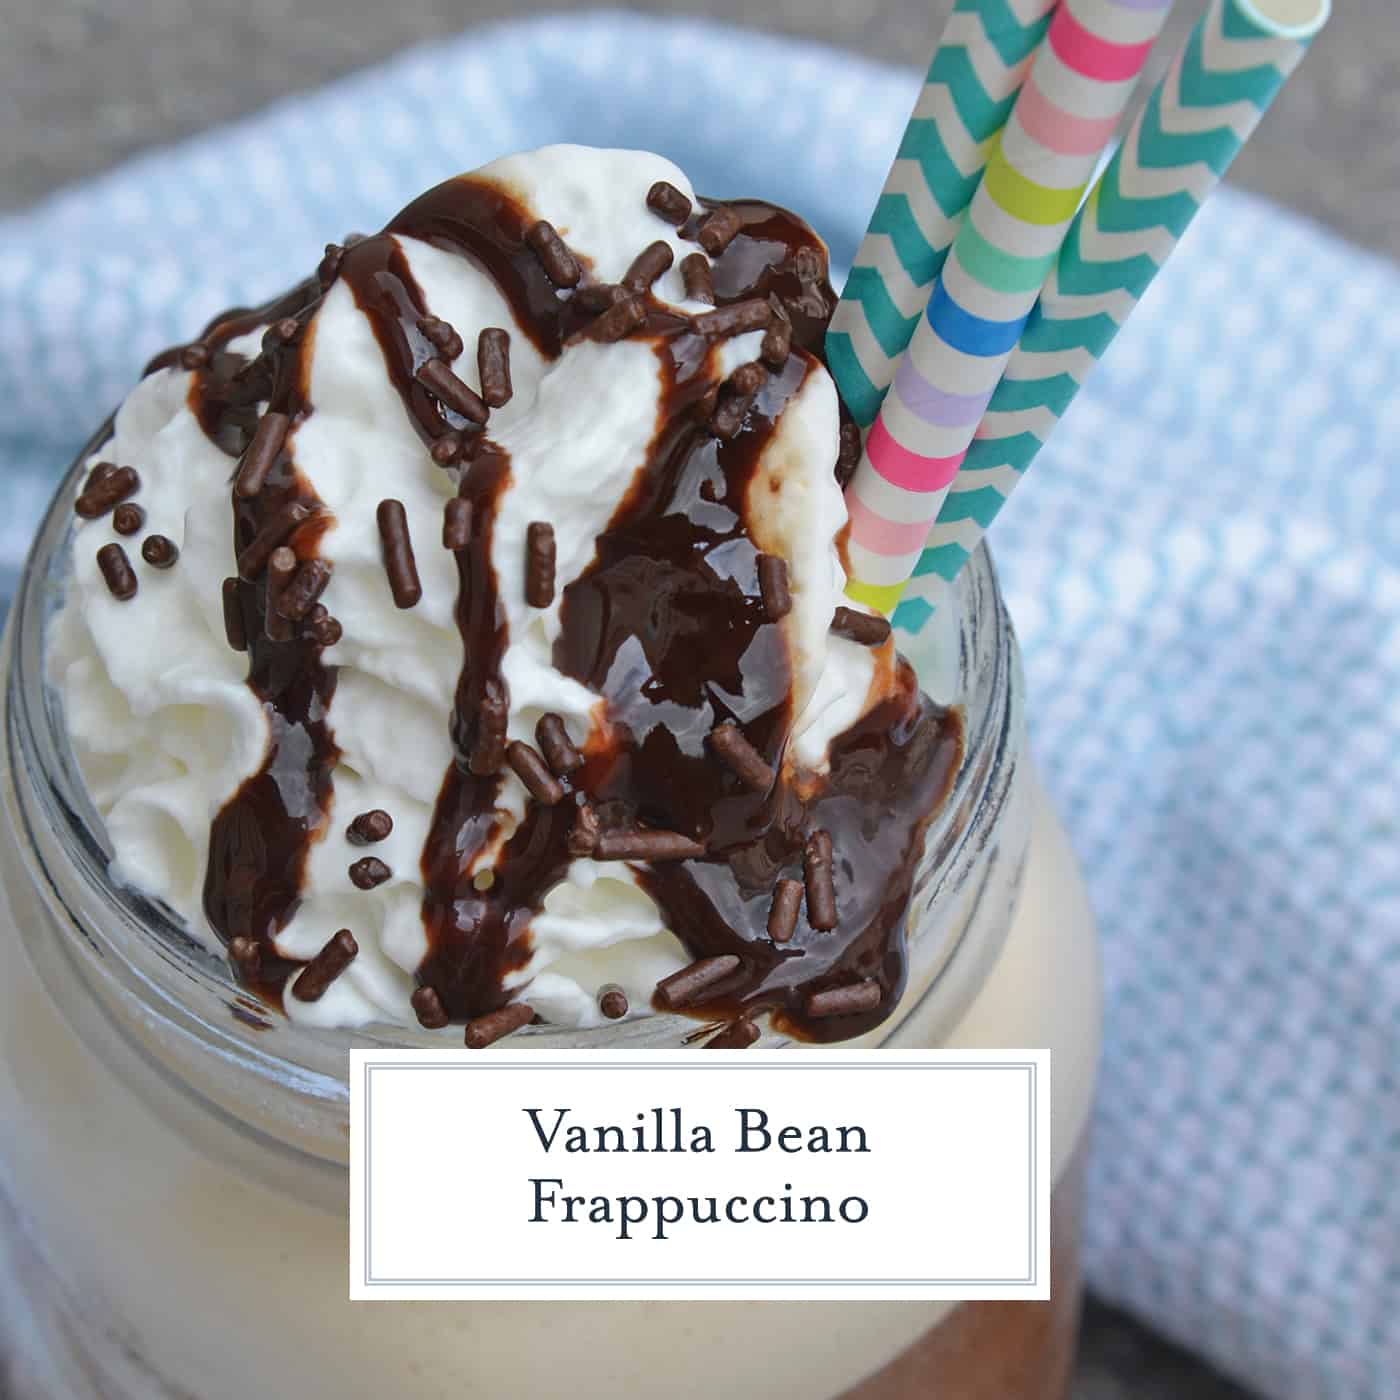 This Vanilla Bean Frappuccino Cocktail is a copycat version of the Starbucks Vanilla Bean Frappuccino that can be made at home to save you money! #vanillabeanfrappuccino #coffeecocktails #vanillacocktails www.savoryexperiments.com